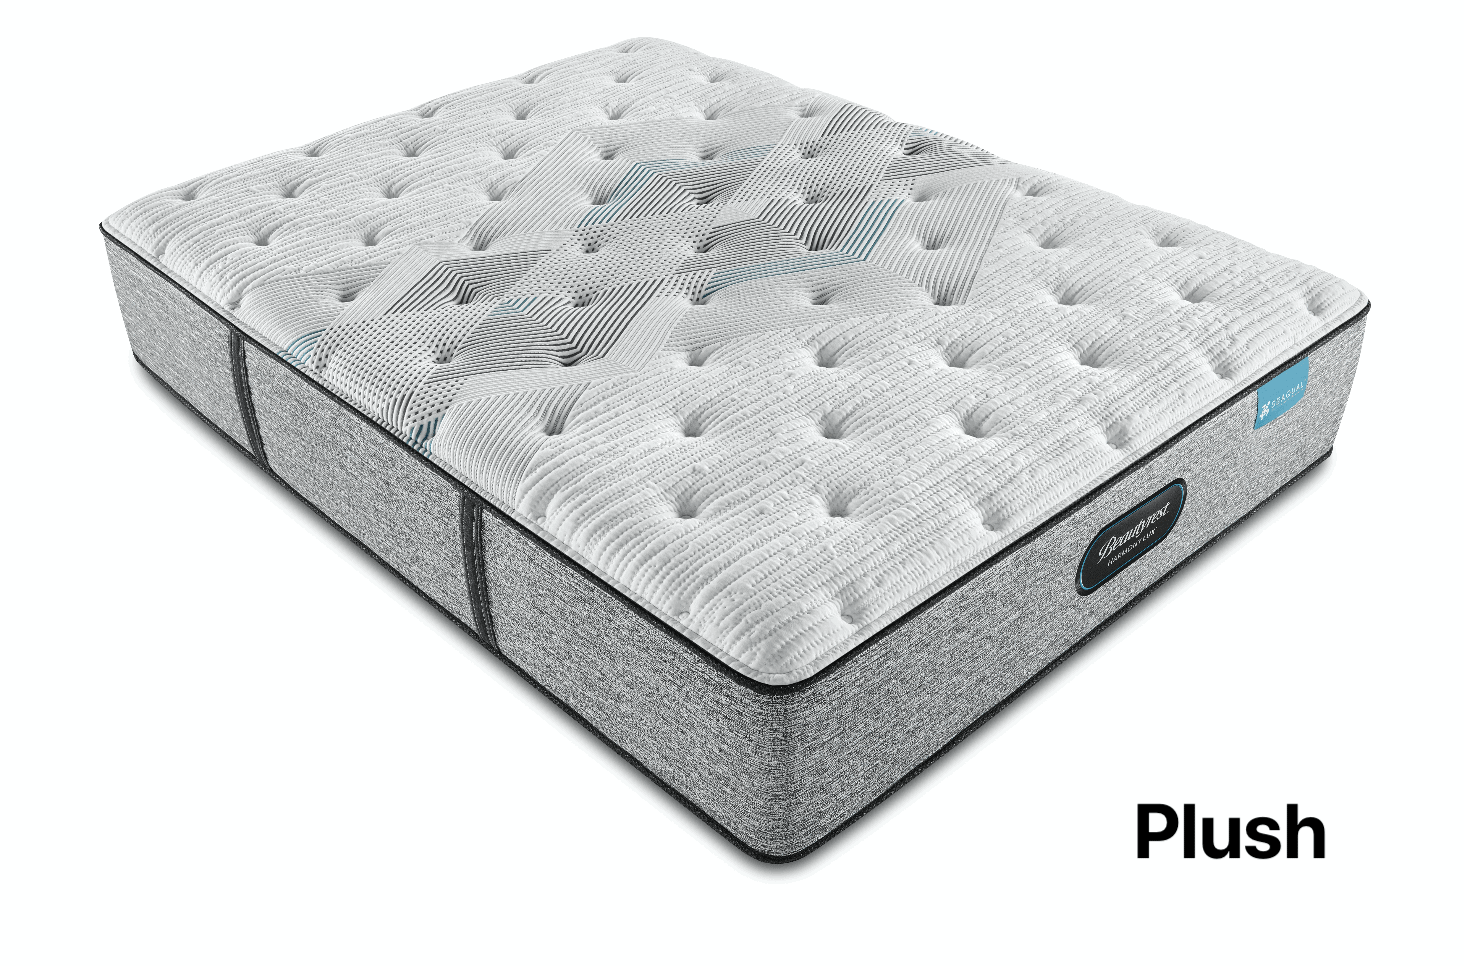 NEW Beautyrest® Harmony Lux Carbon Series